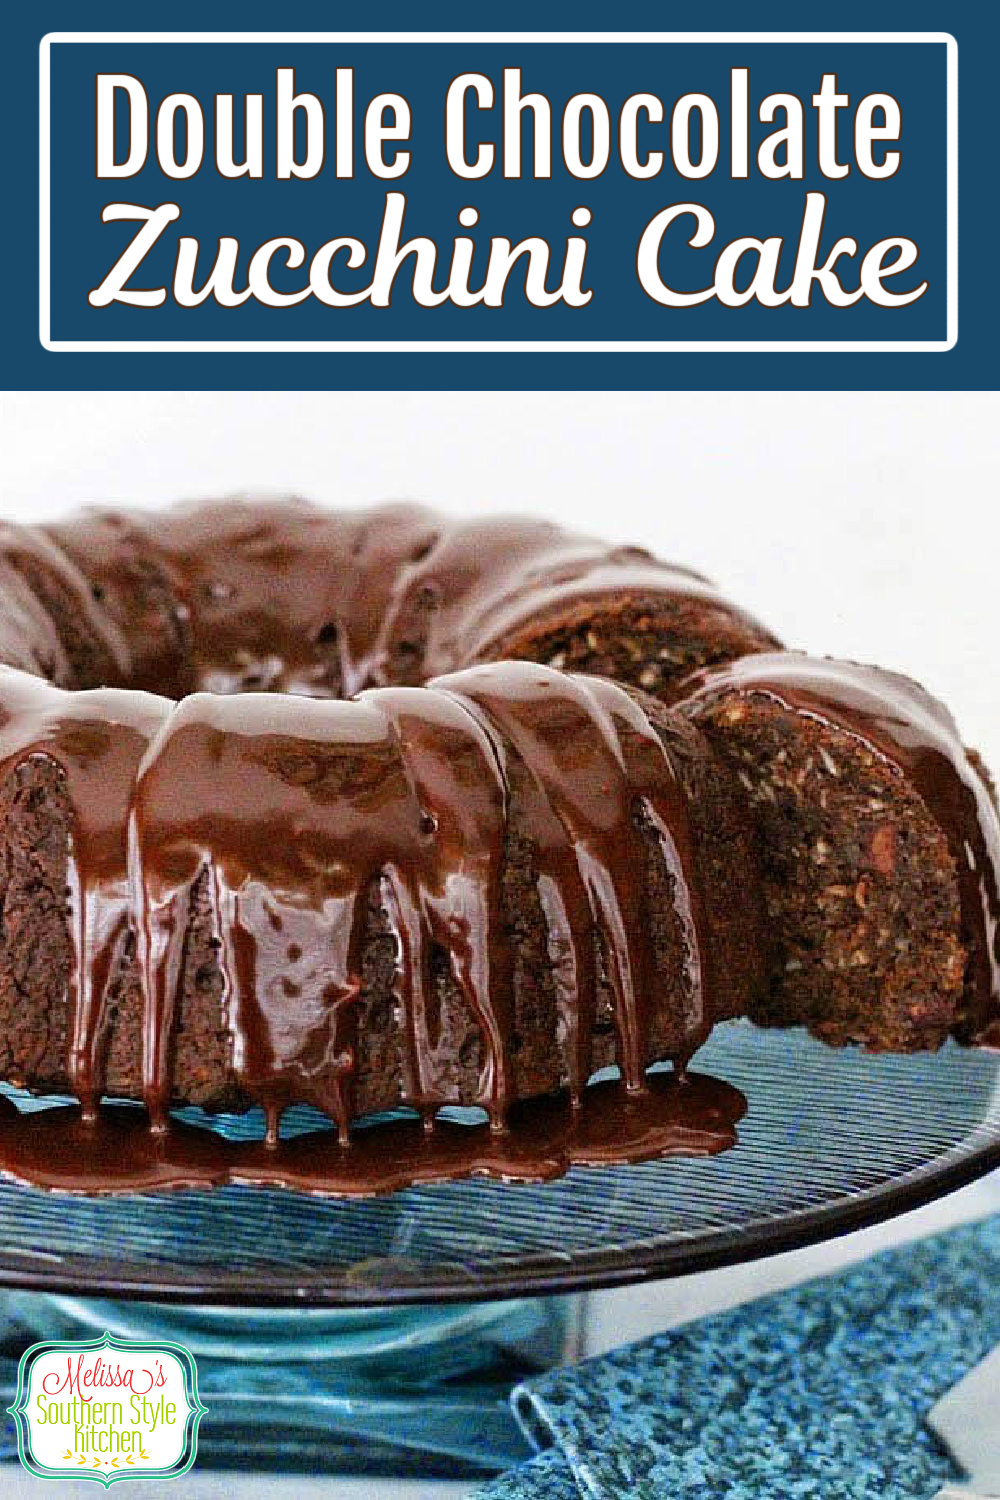 This rich and fudgy Double Chocolate Zucchini Cake will have the family eating their vegetables for dessert #doublechocolatecake #chocolatecake #zucchinicake #zucchinirecipes #chocolate #chocolatedesserts #desserts #dessertfoodrecipes #southernfood #southernrecipes via @melissasssk